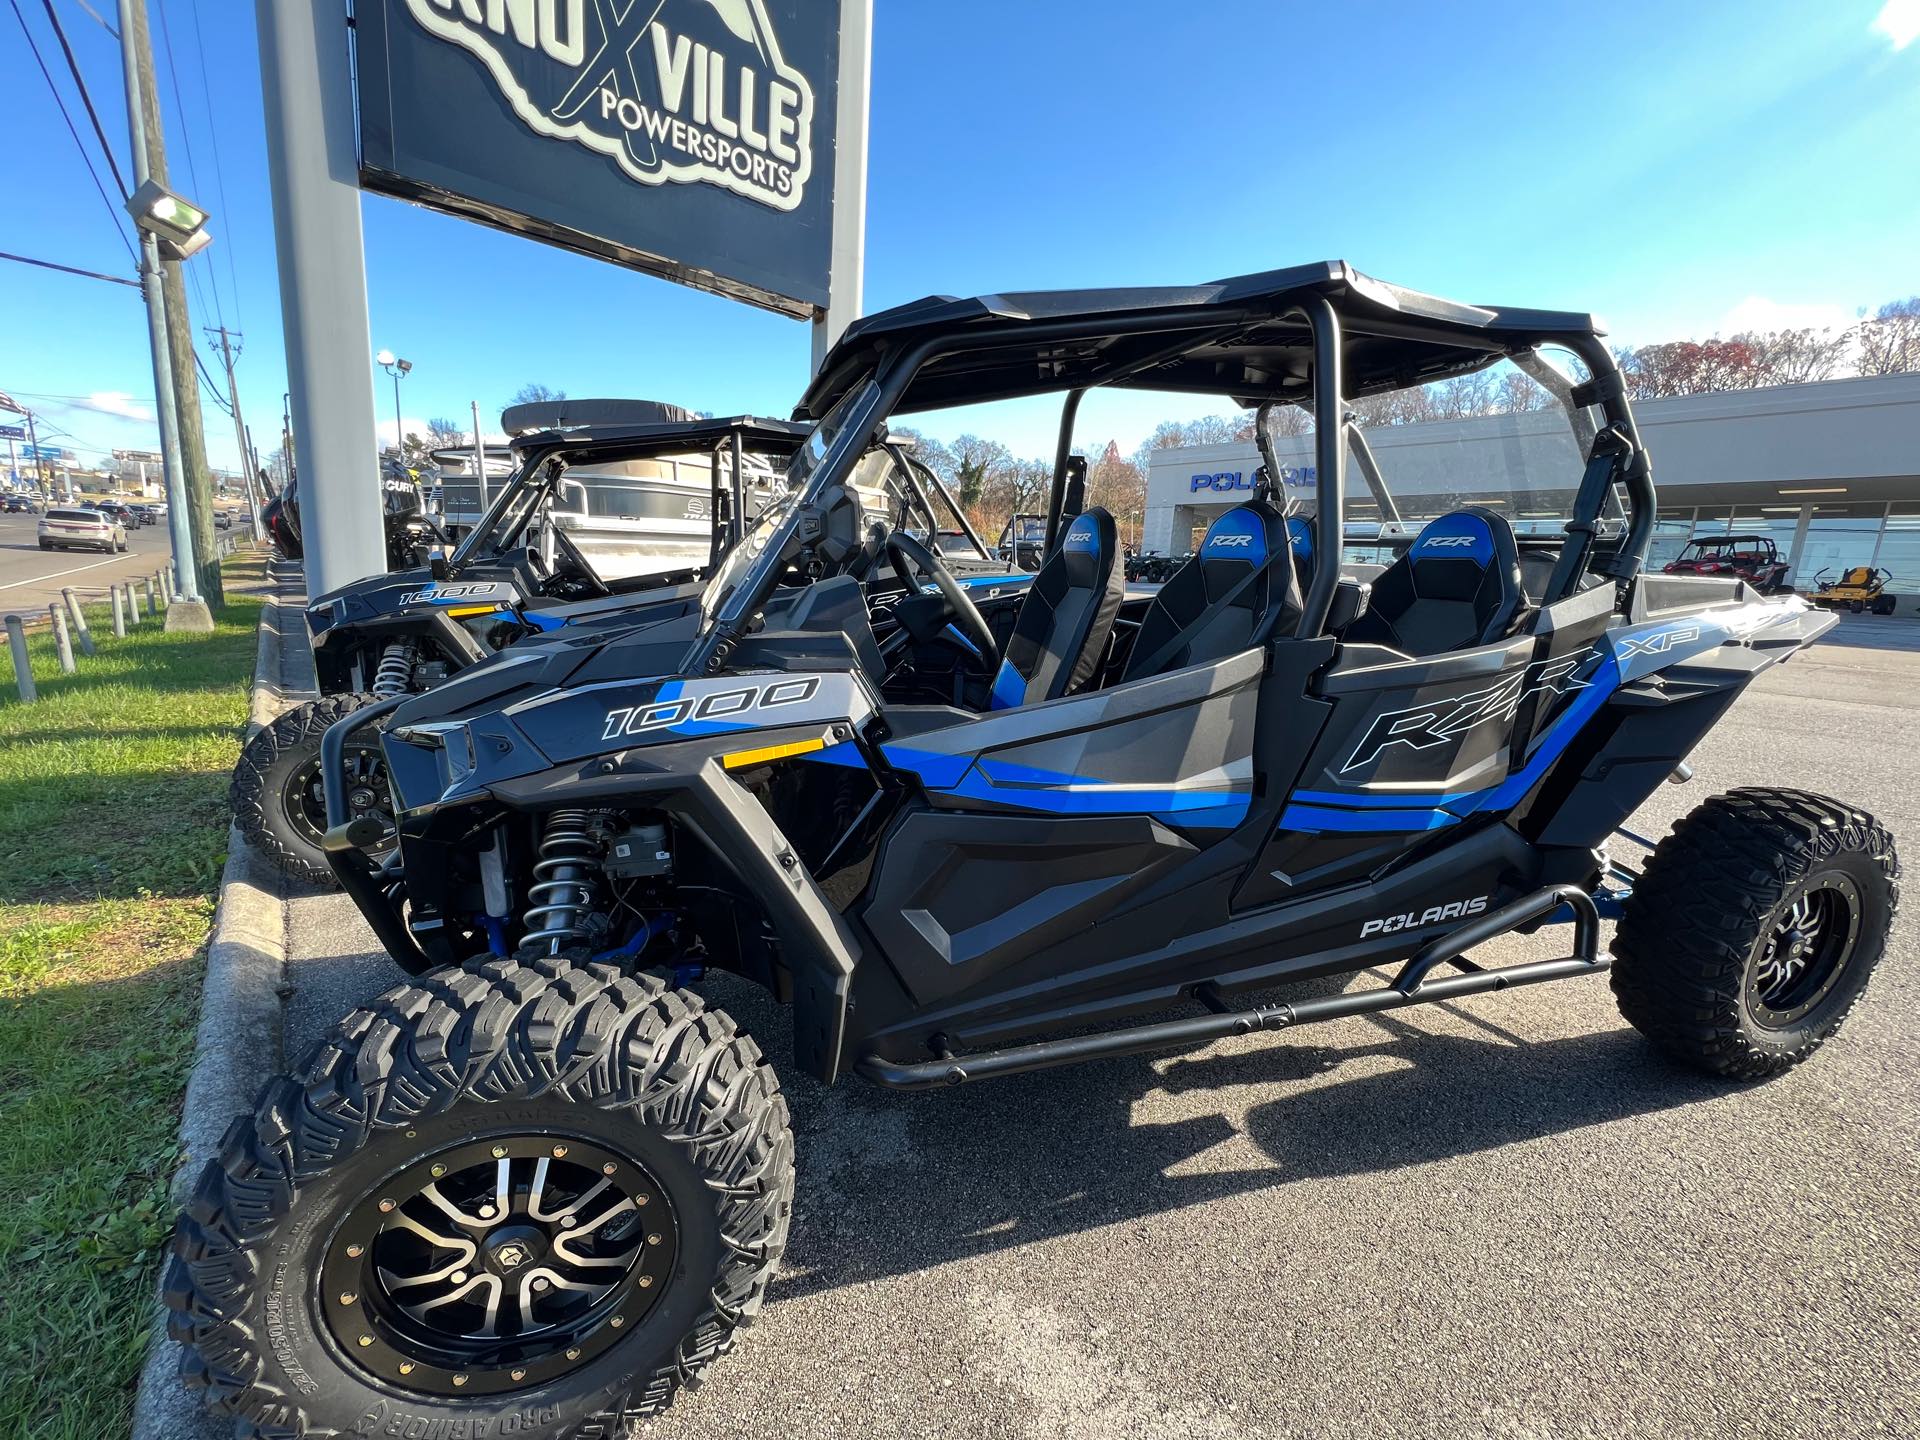 knoxville-powersports-knoxville-tn-tennessee-s-premier-powersports